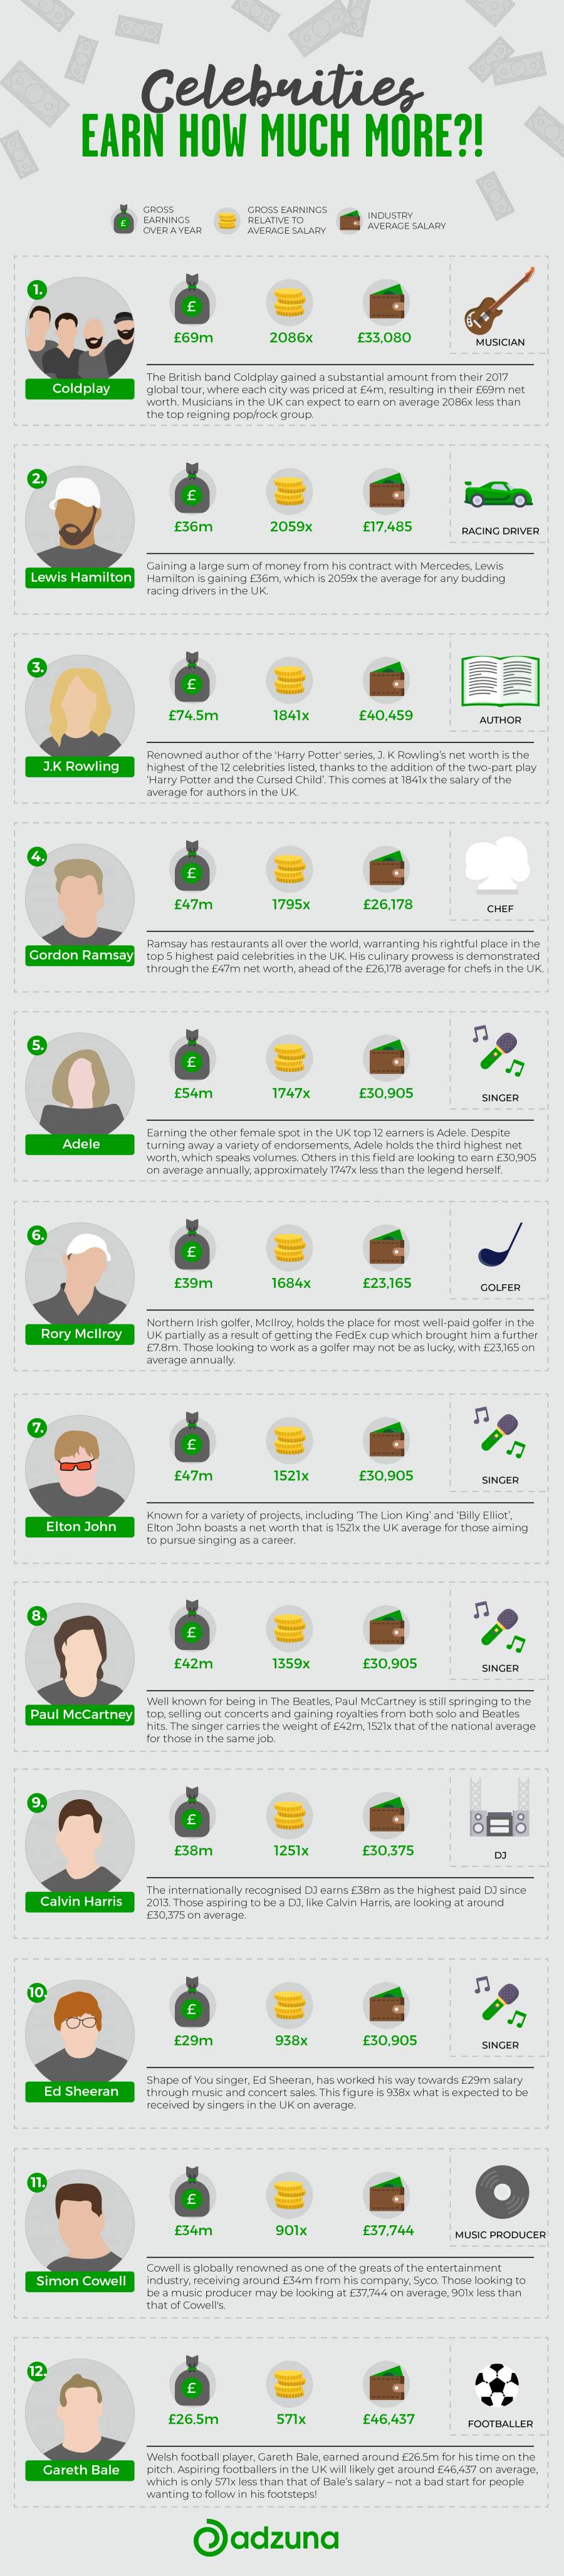 Celebrities Earn How Much More